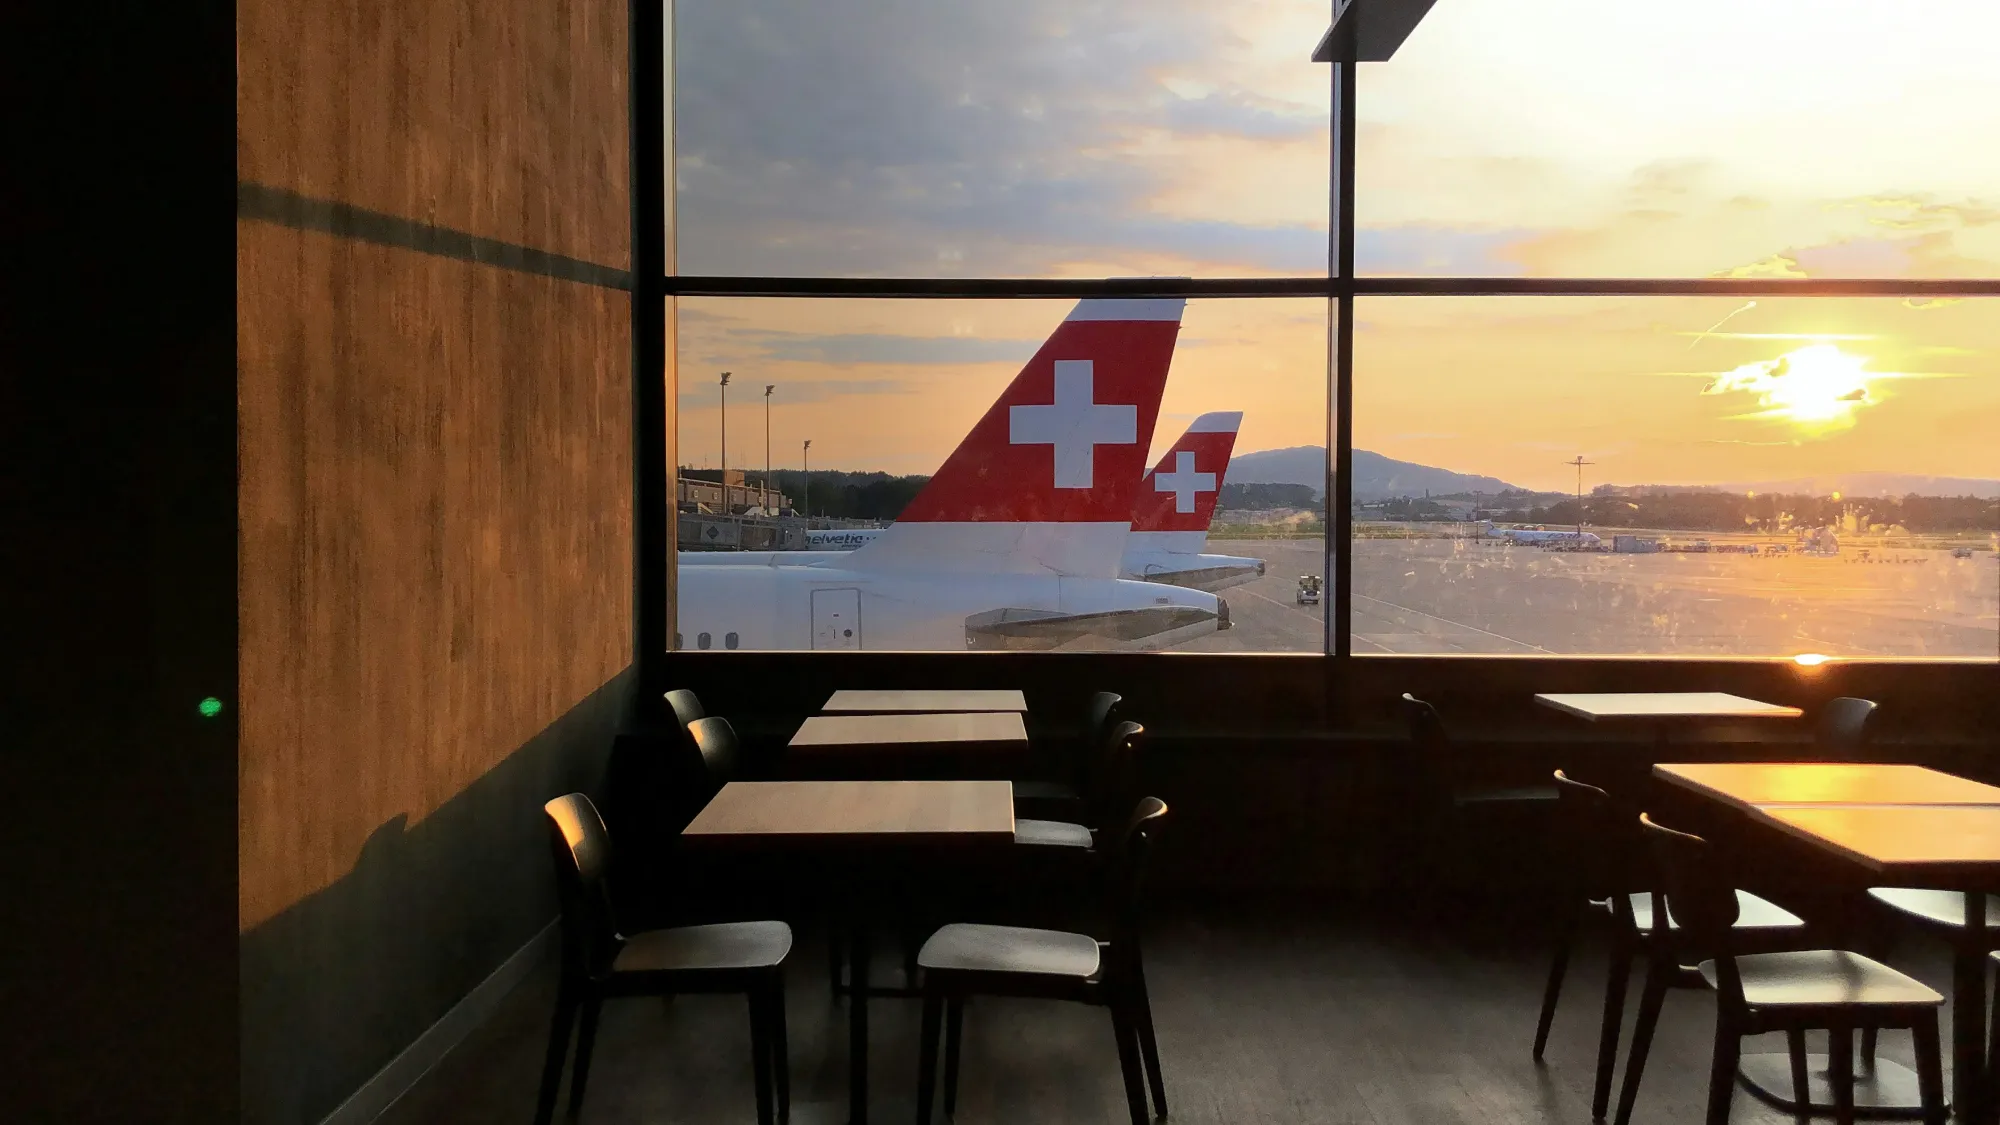 Swiss airline airplance at dusk